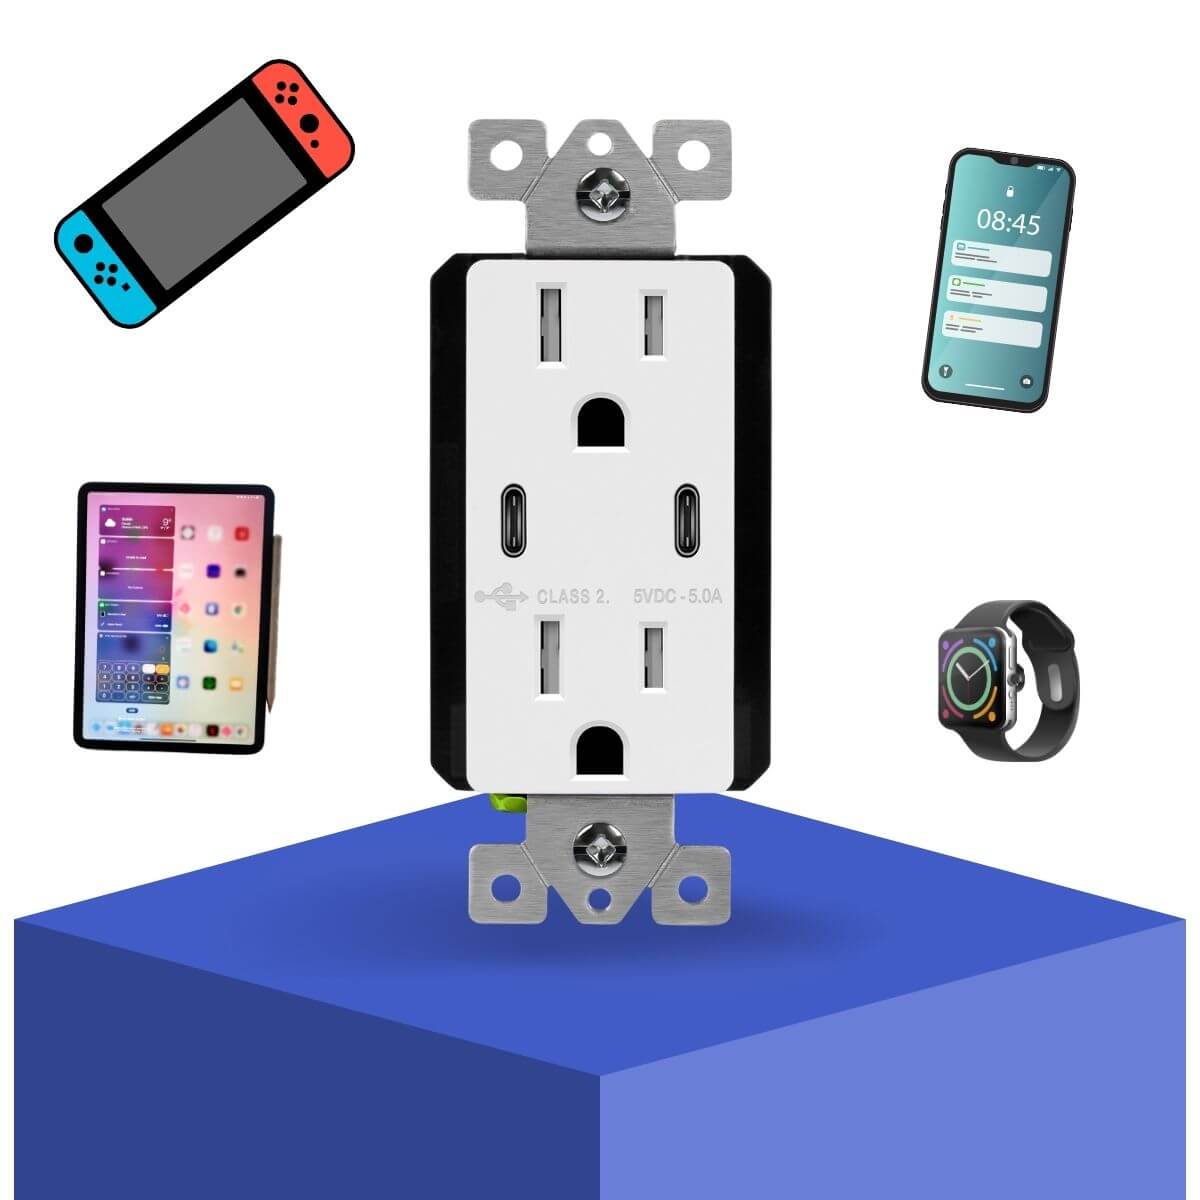 Enerlites high speed USB power delivery outlets 